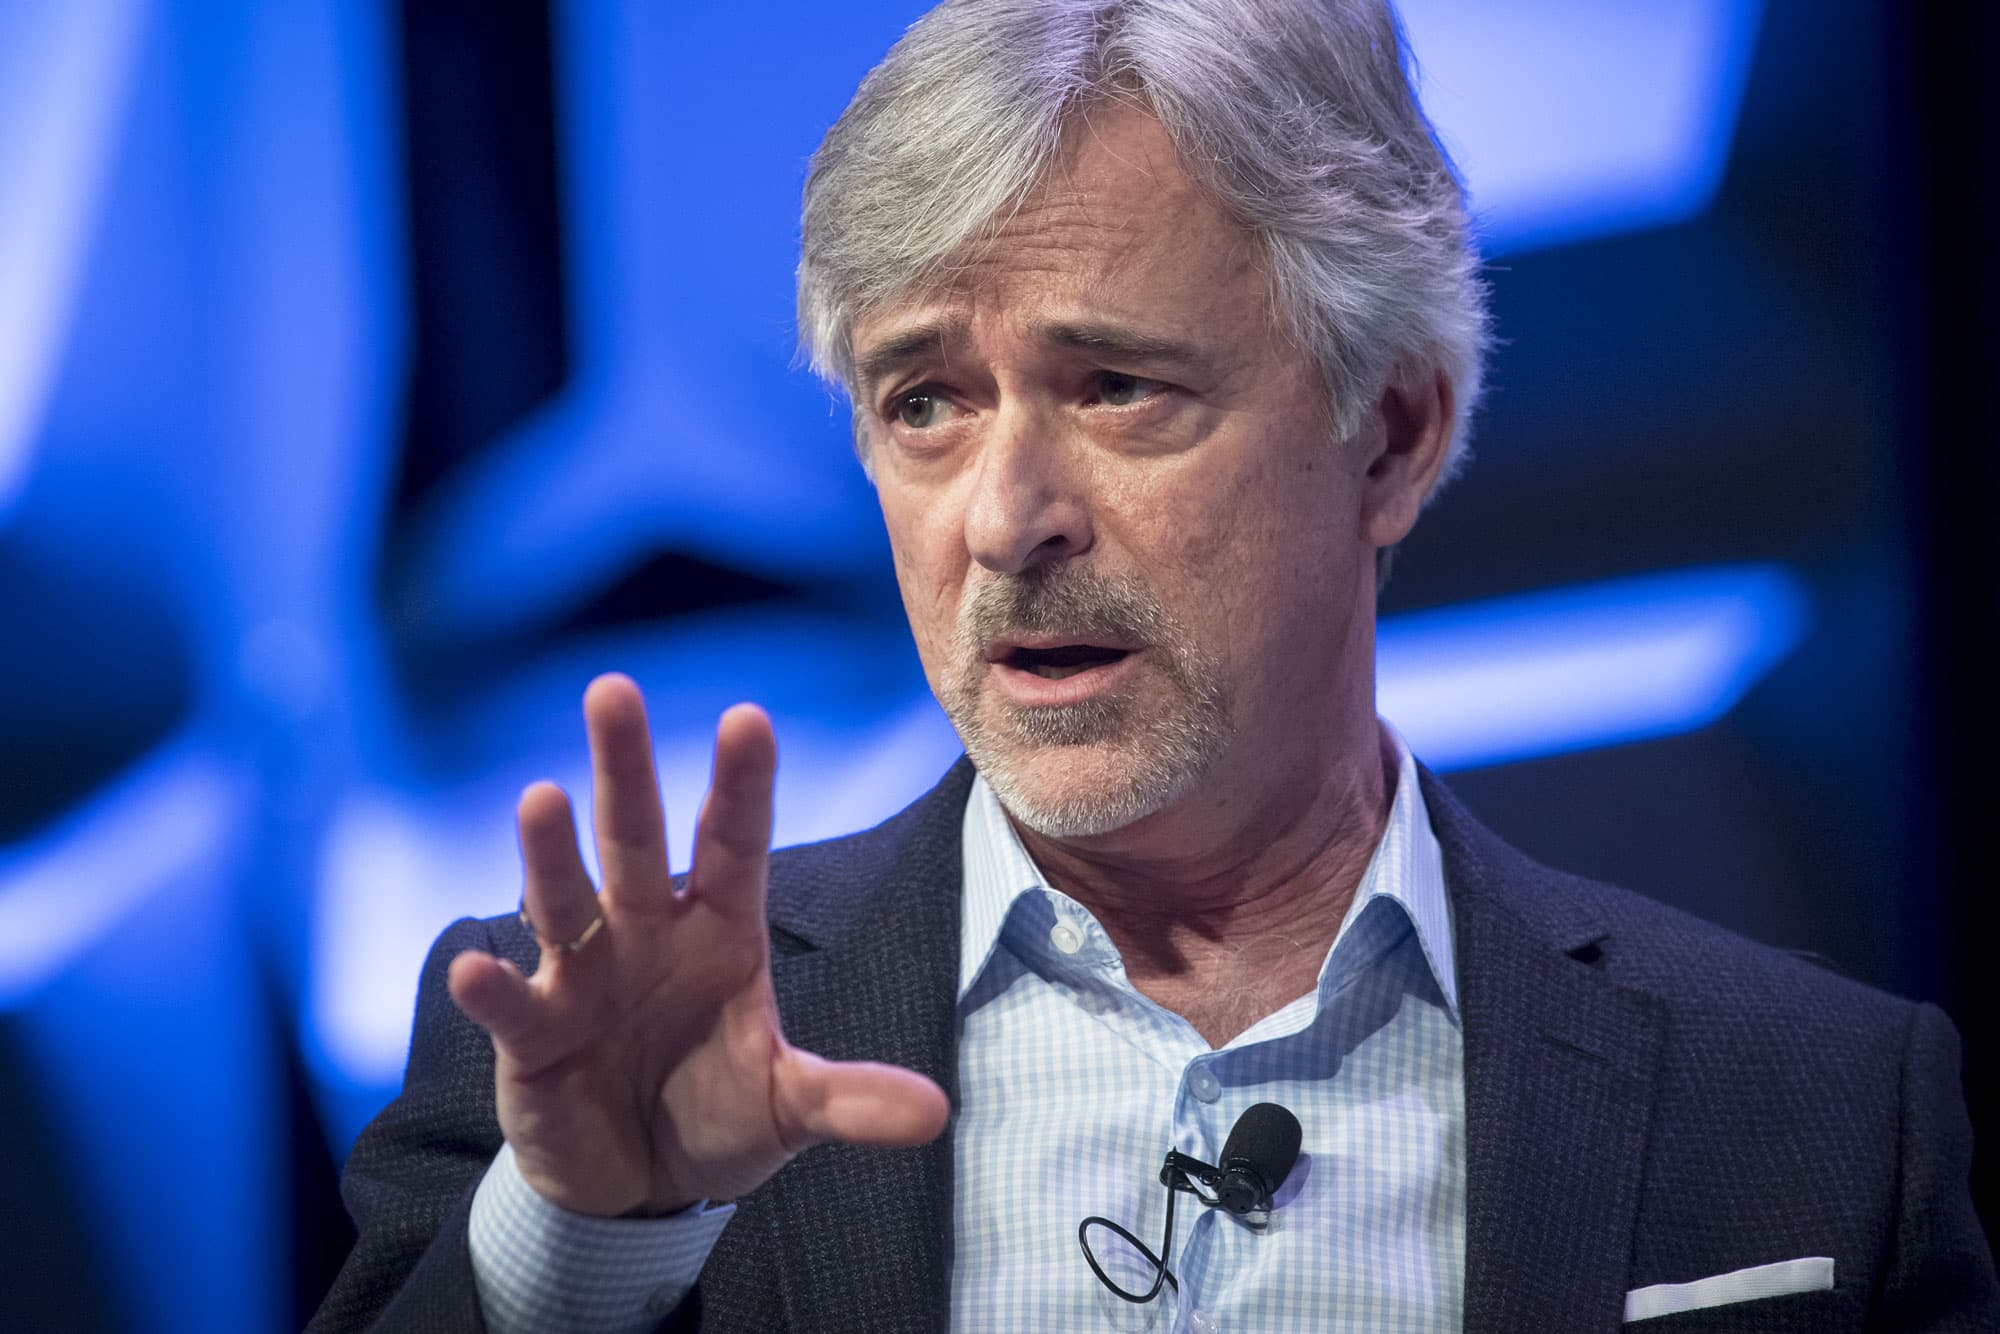 Waymo’s CEO tenure filled with milestones, obstacles and hype